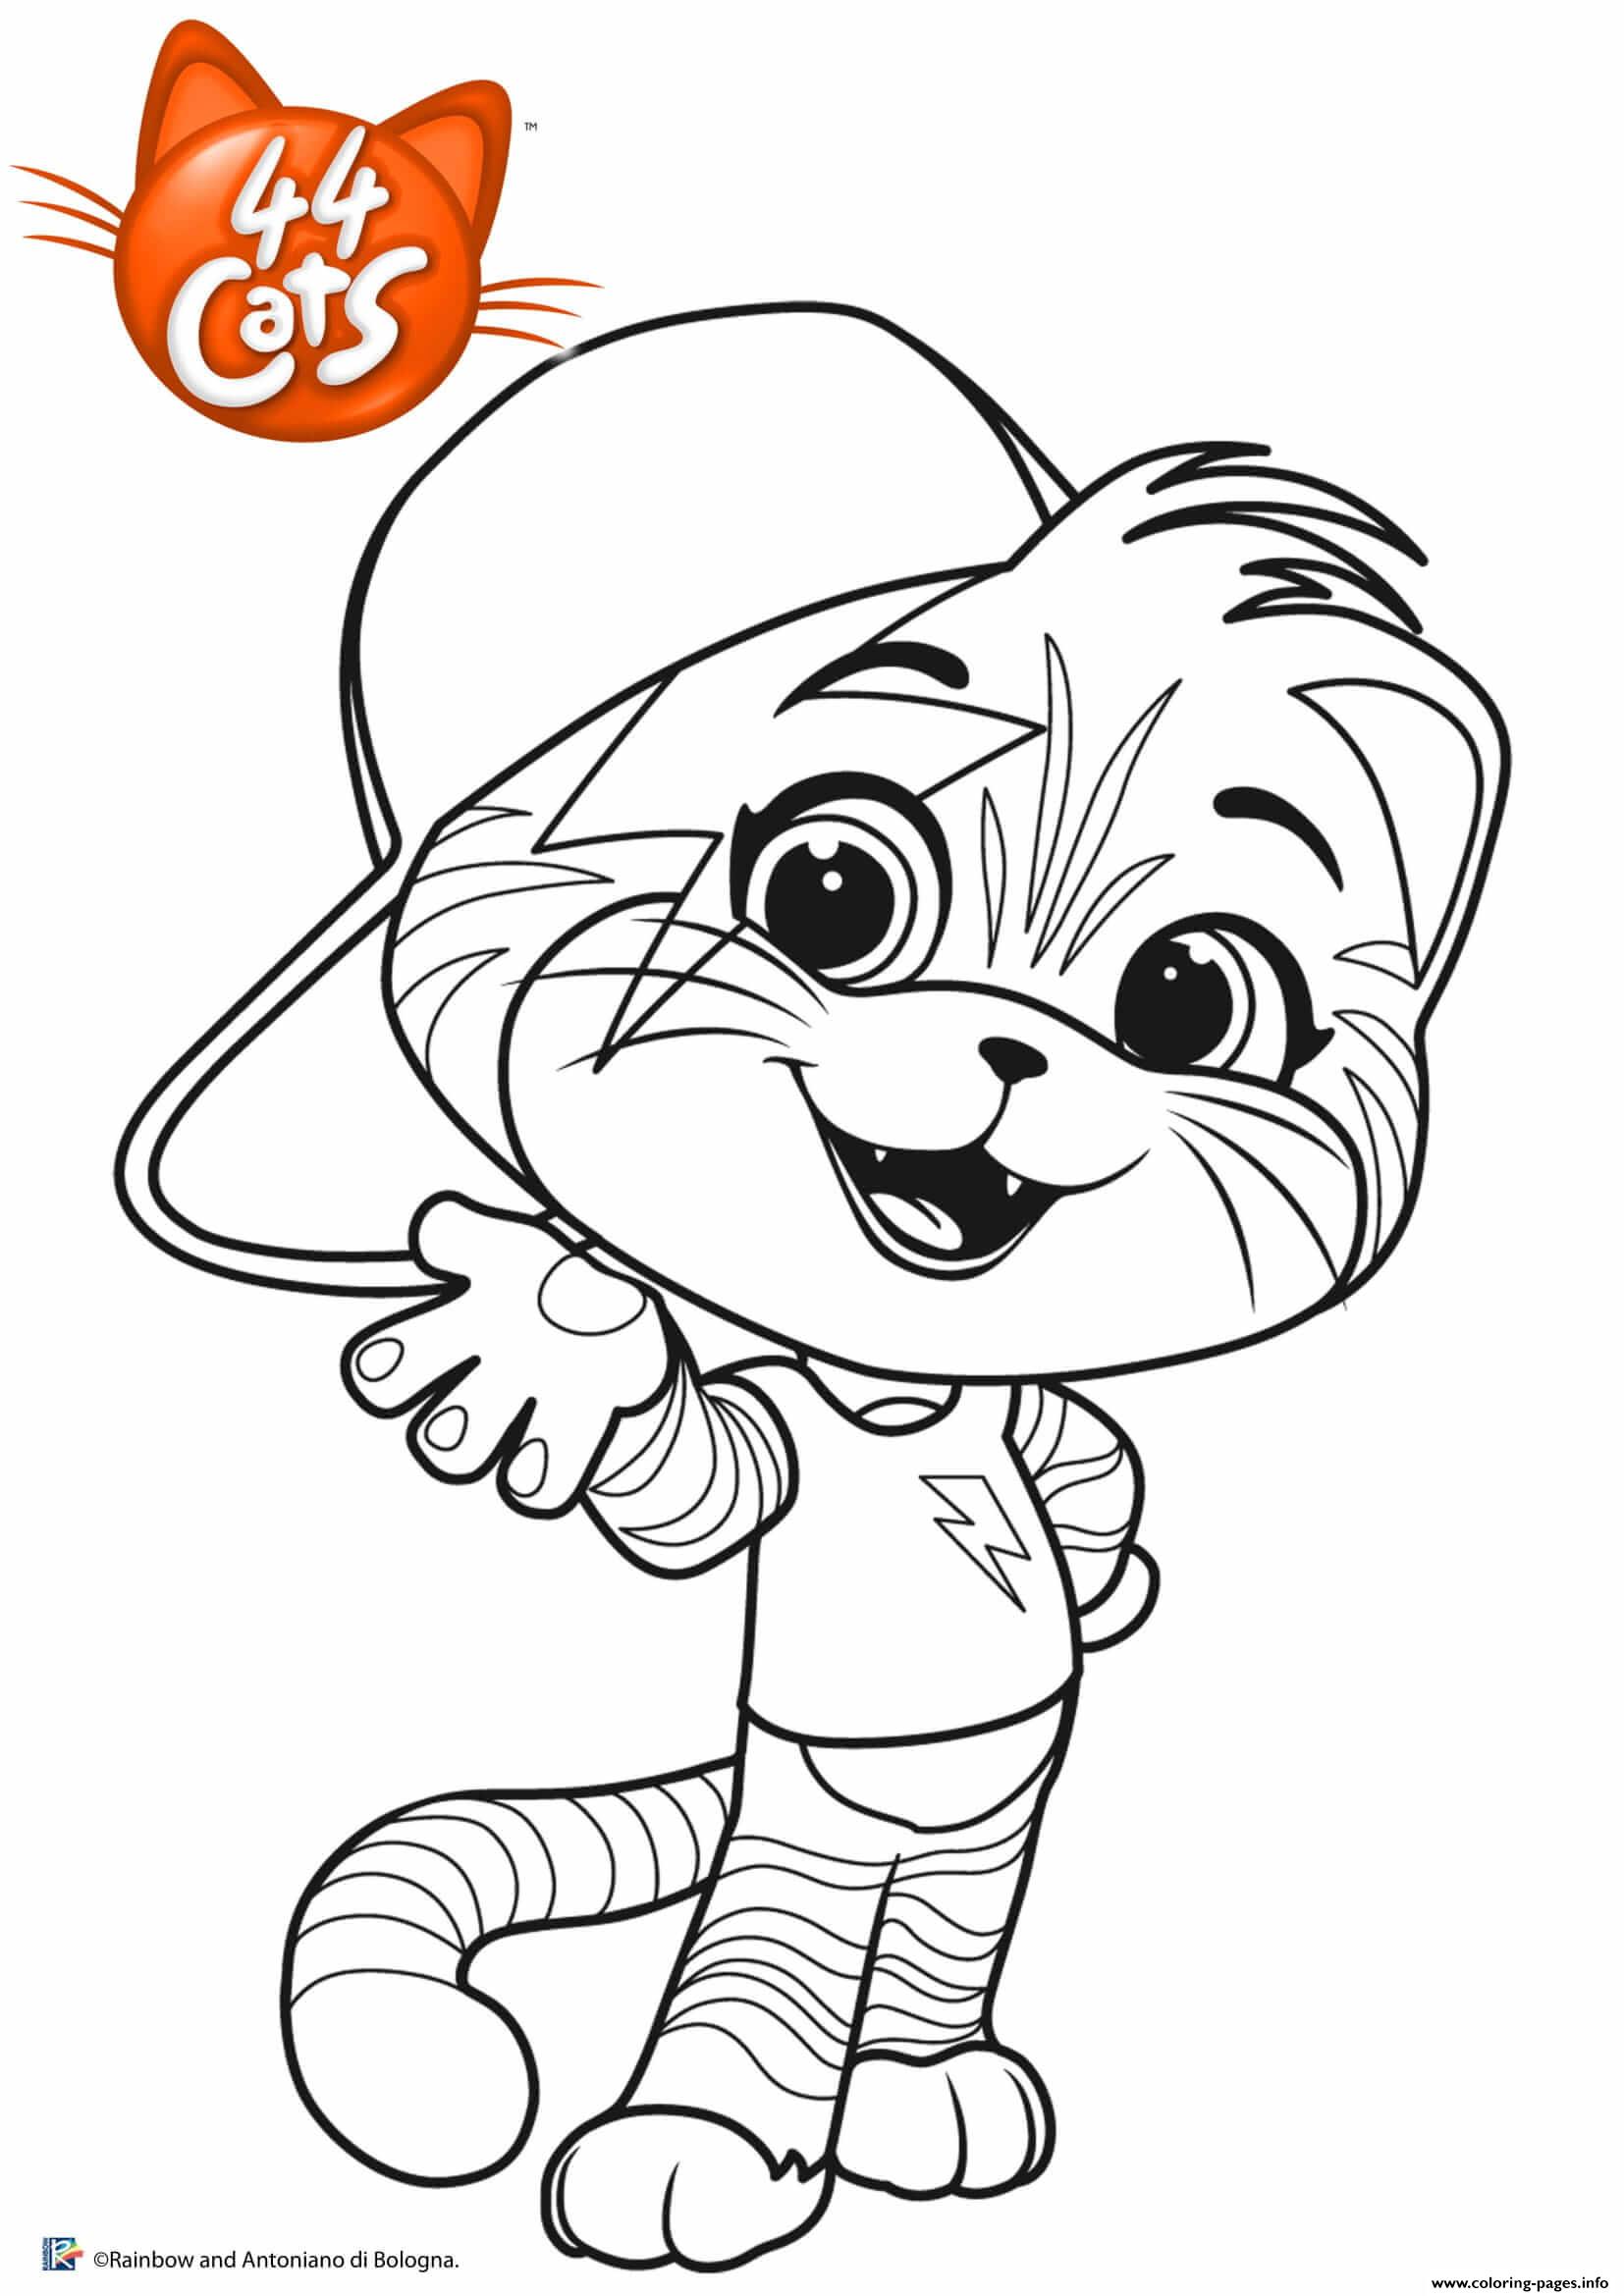 Lampo 44 Cats Coloring Pages Printable